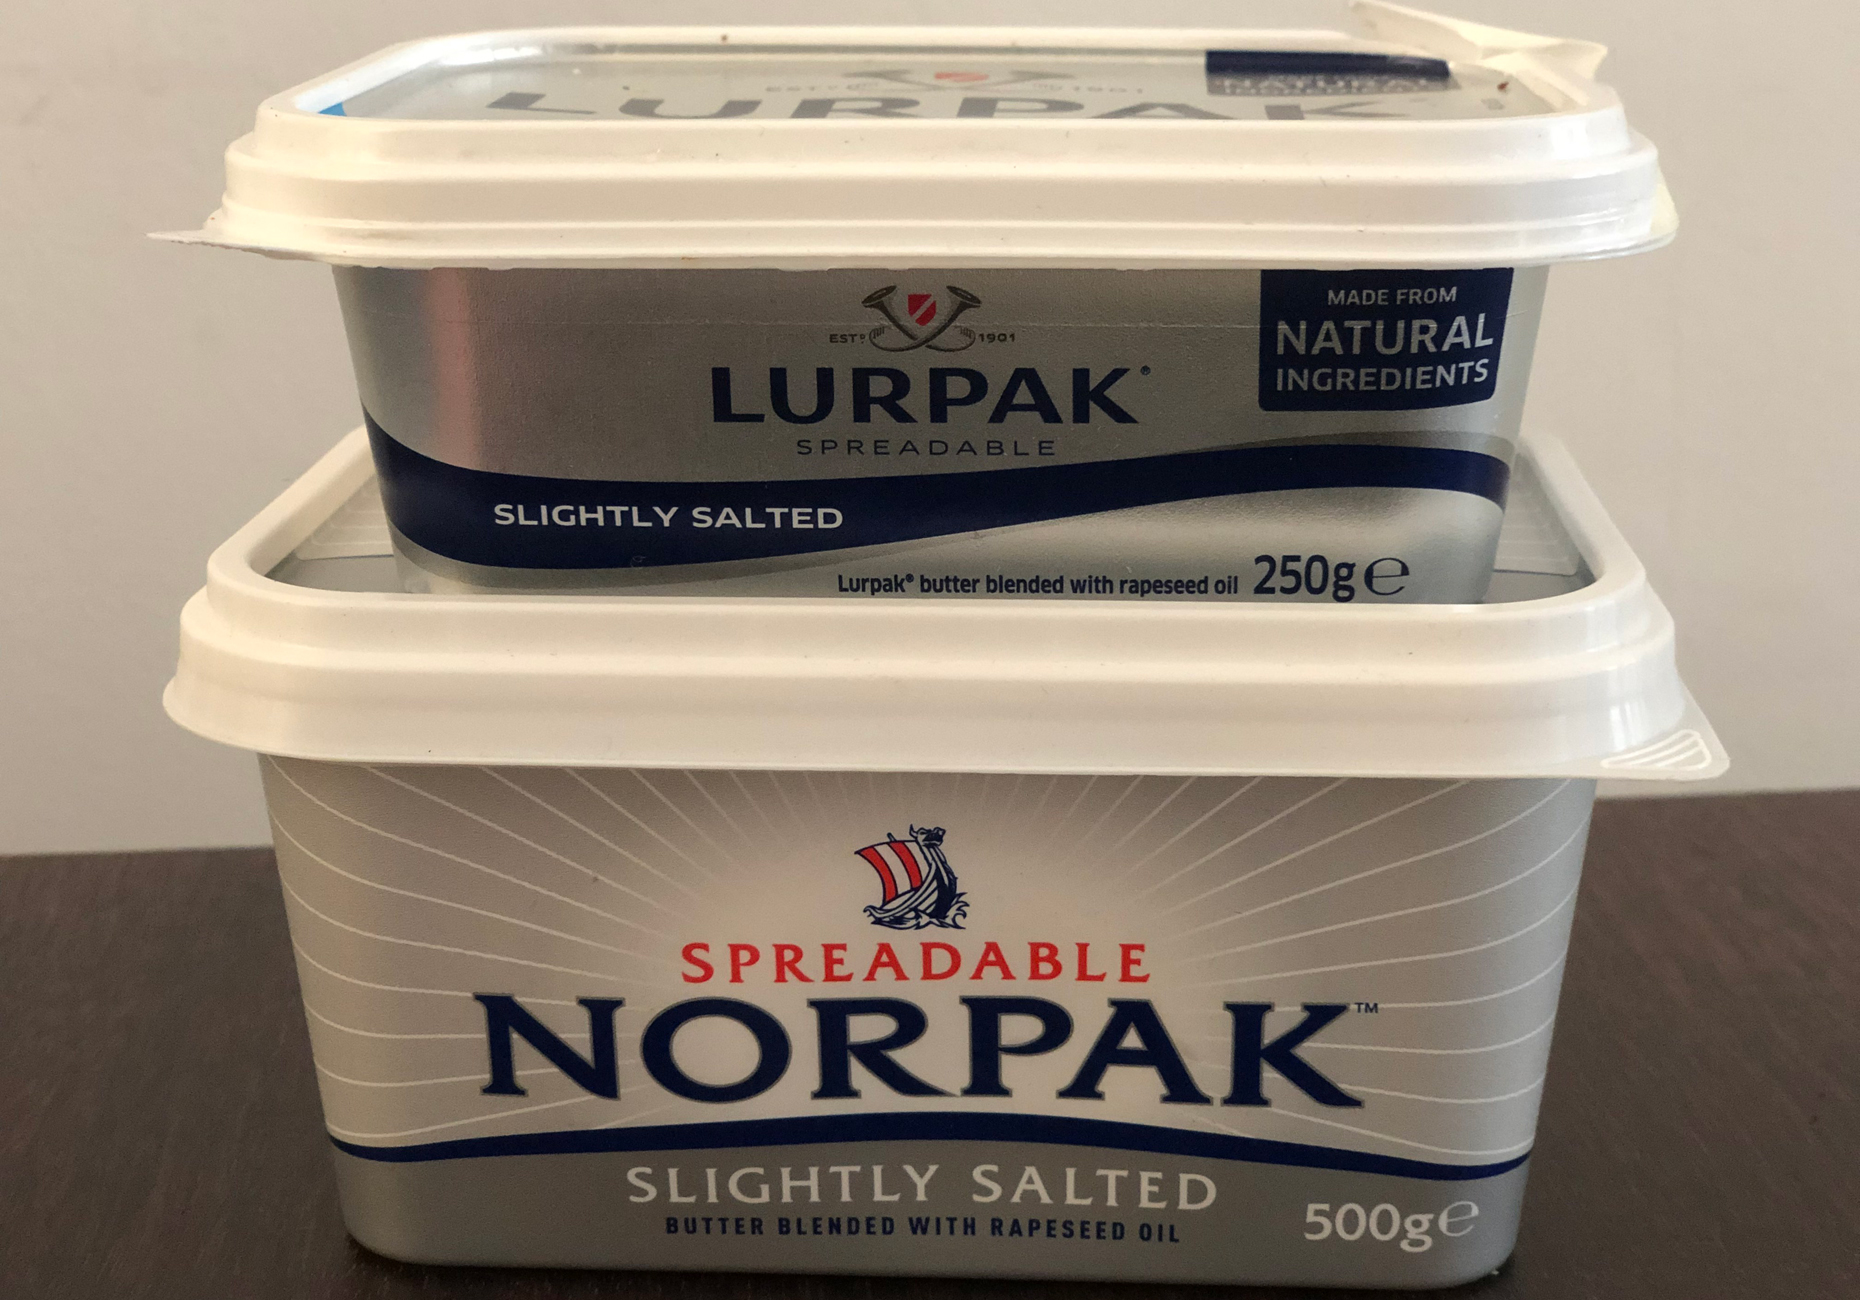 Norpak has more than a passing resemblance to Lurpak (Image: loveMONEY)